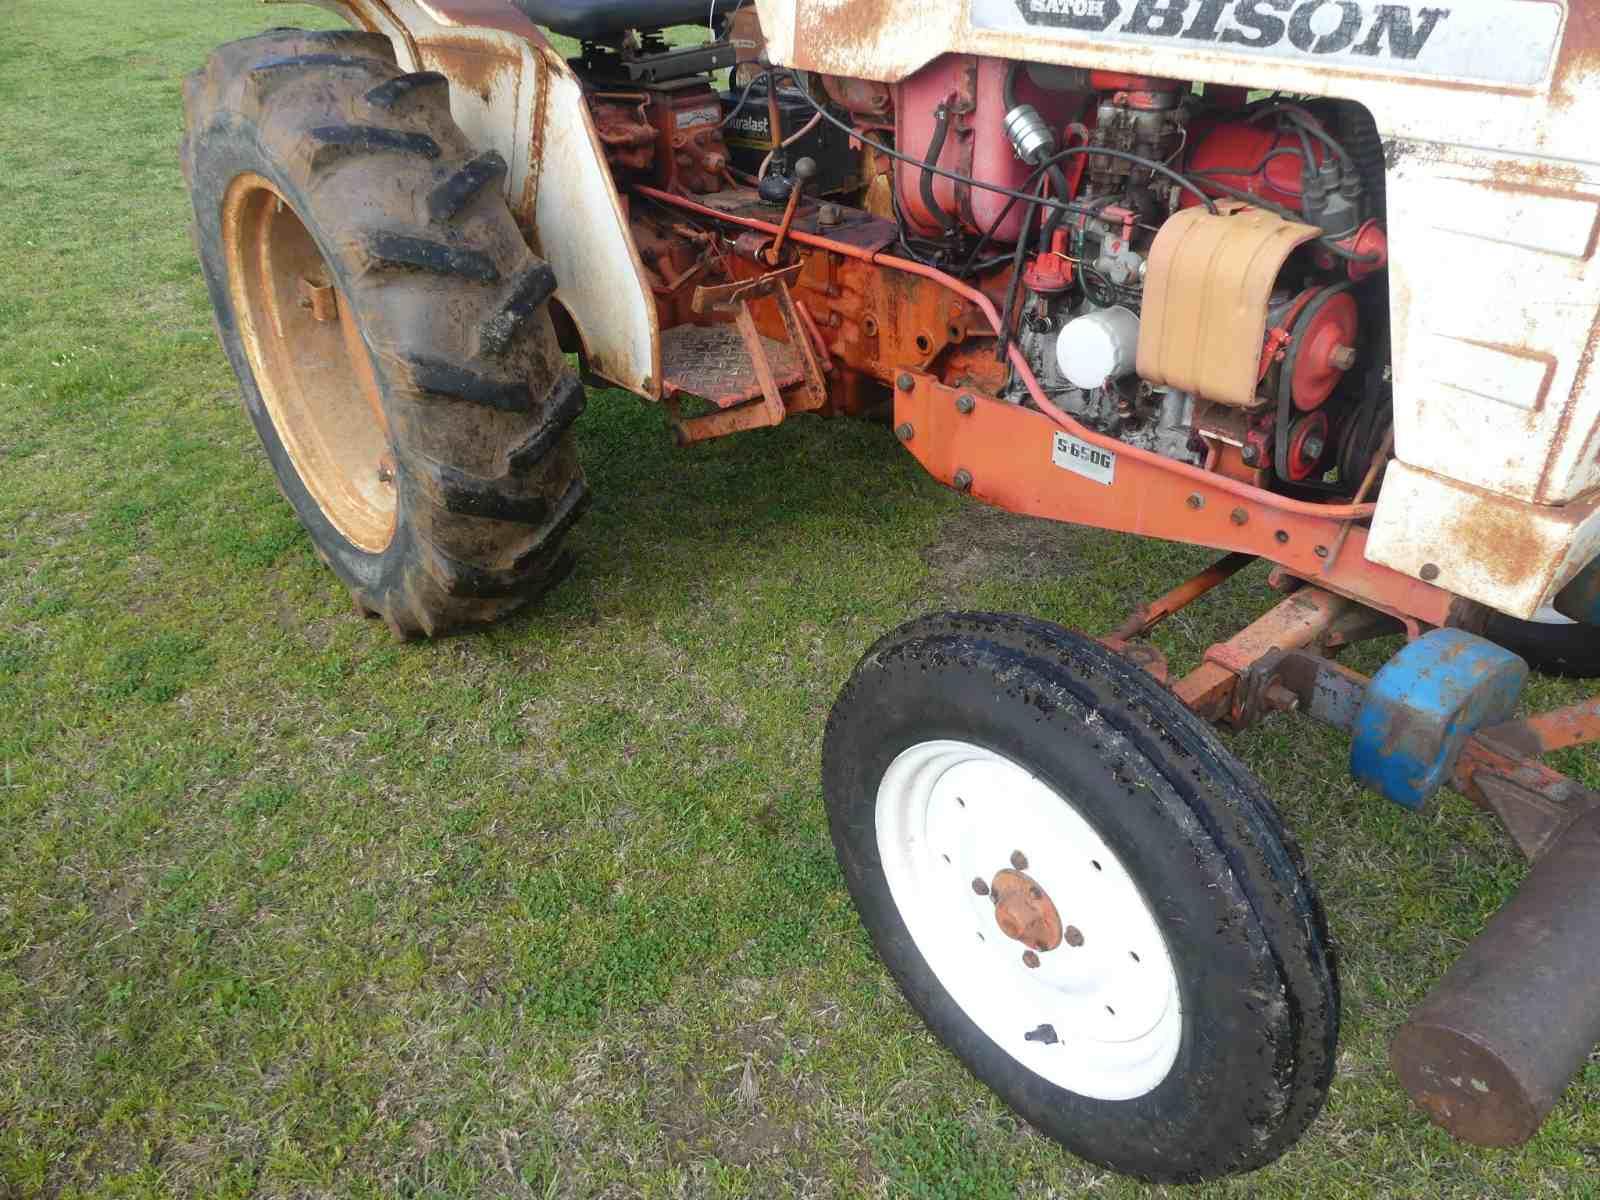 Satoh Bison S650G Tractor, s/n Not Found: 25hp Gas Eng., 2wd, Meter Shows 1